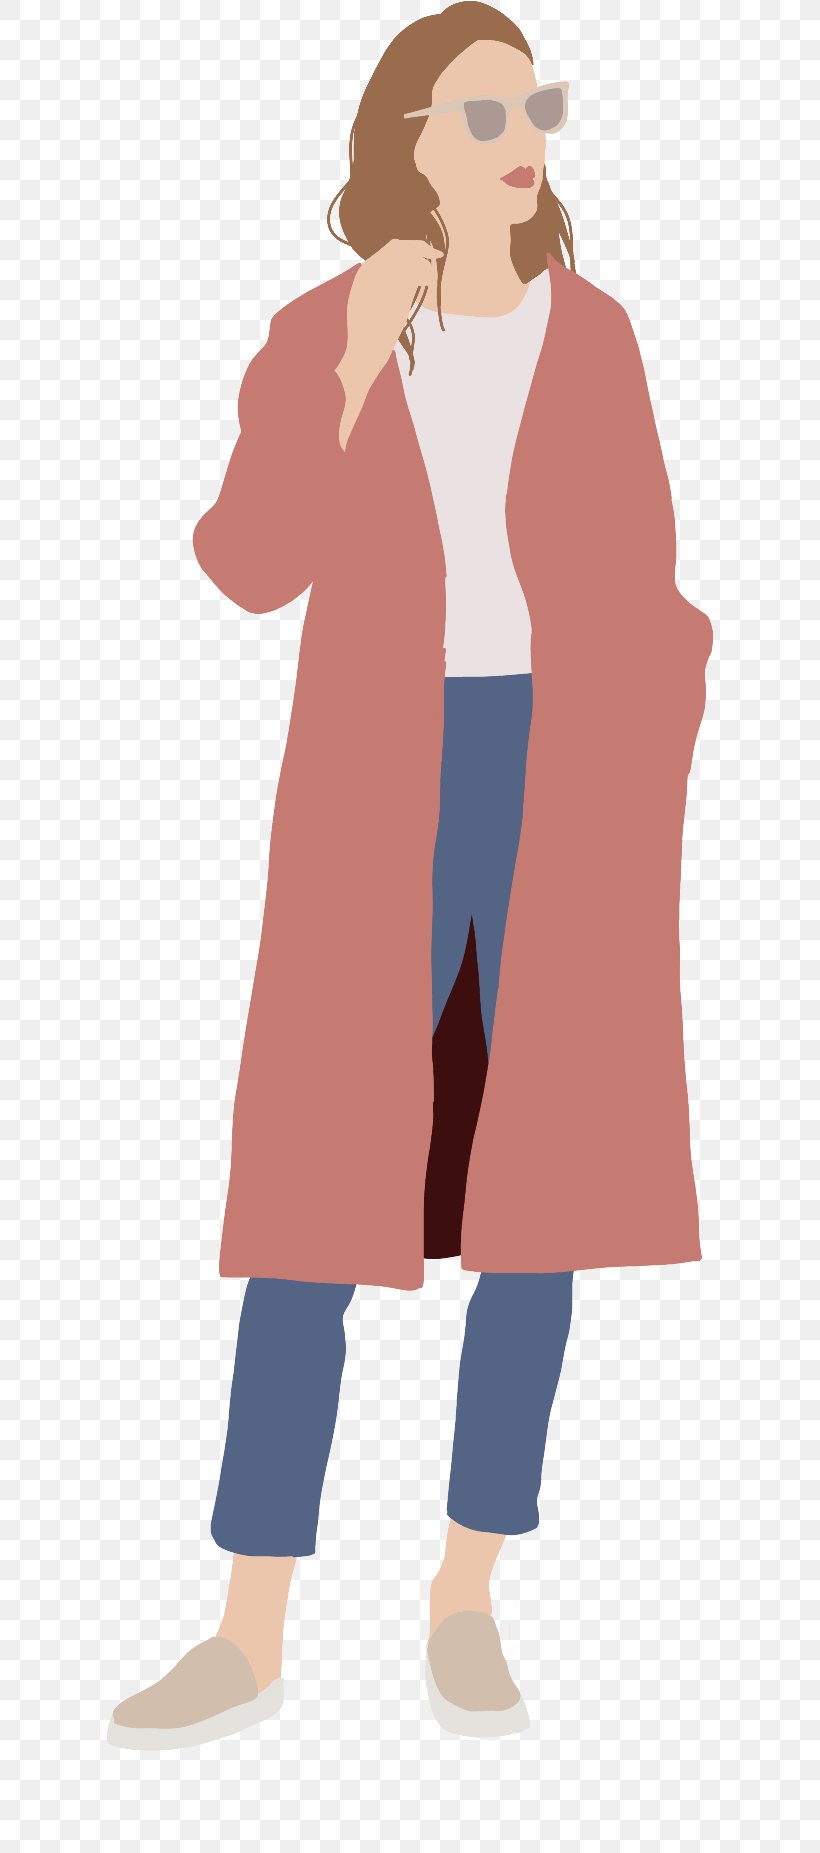 Person Cartoon, PNG, 607x1853px, Architecture, Clothing, Collage, Fur, Gesture Download Free